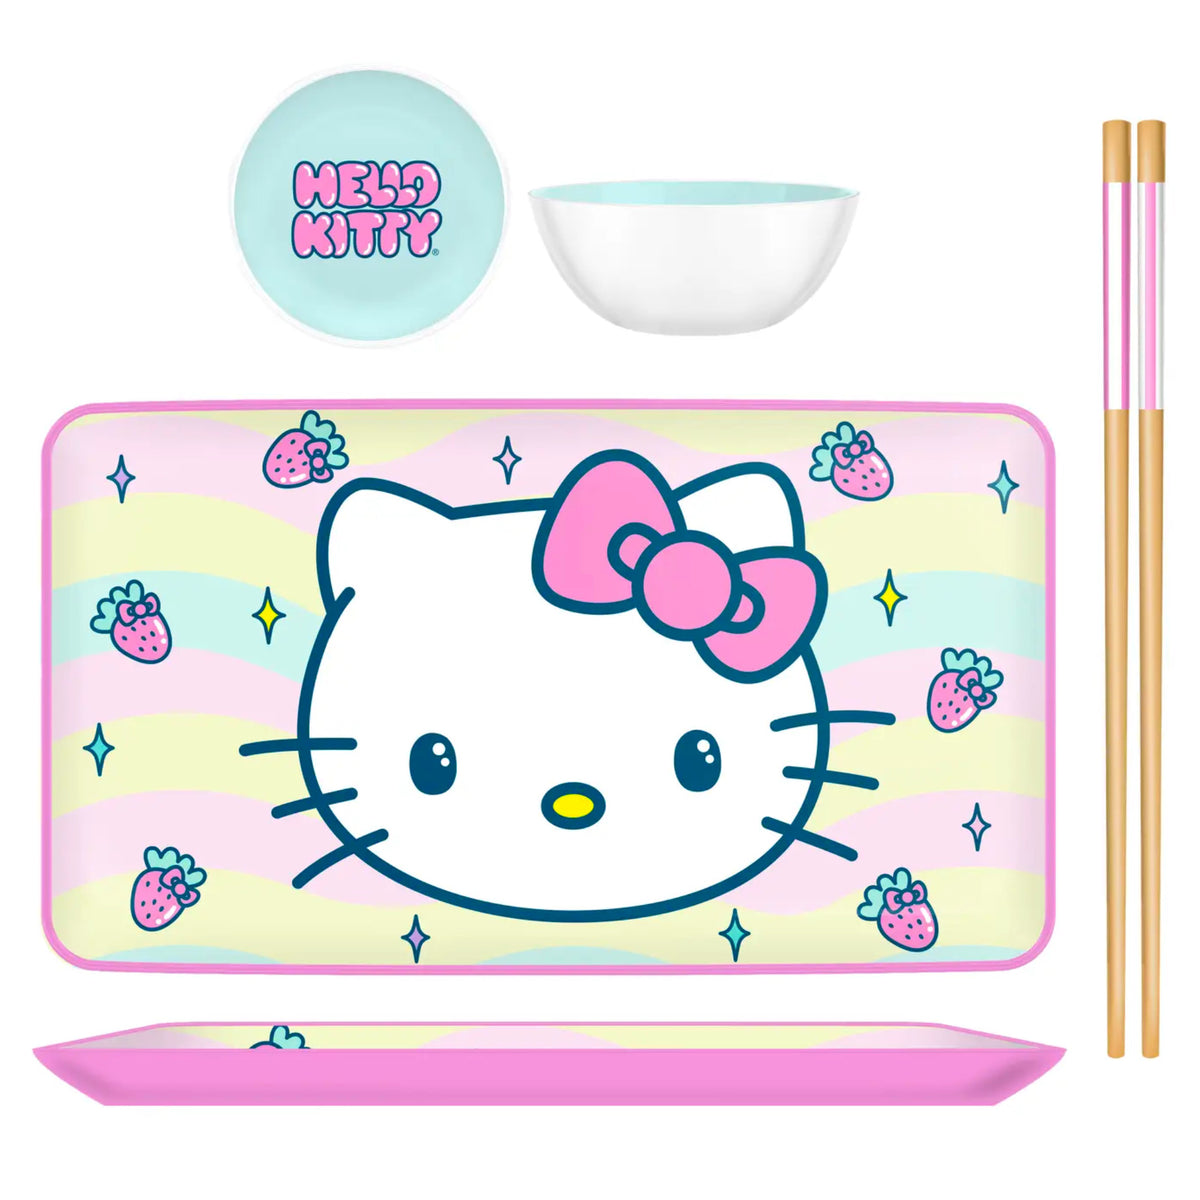 Hello Kitty Face and Strawberries 3pc Ceramic Sushi Set